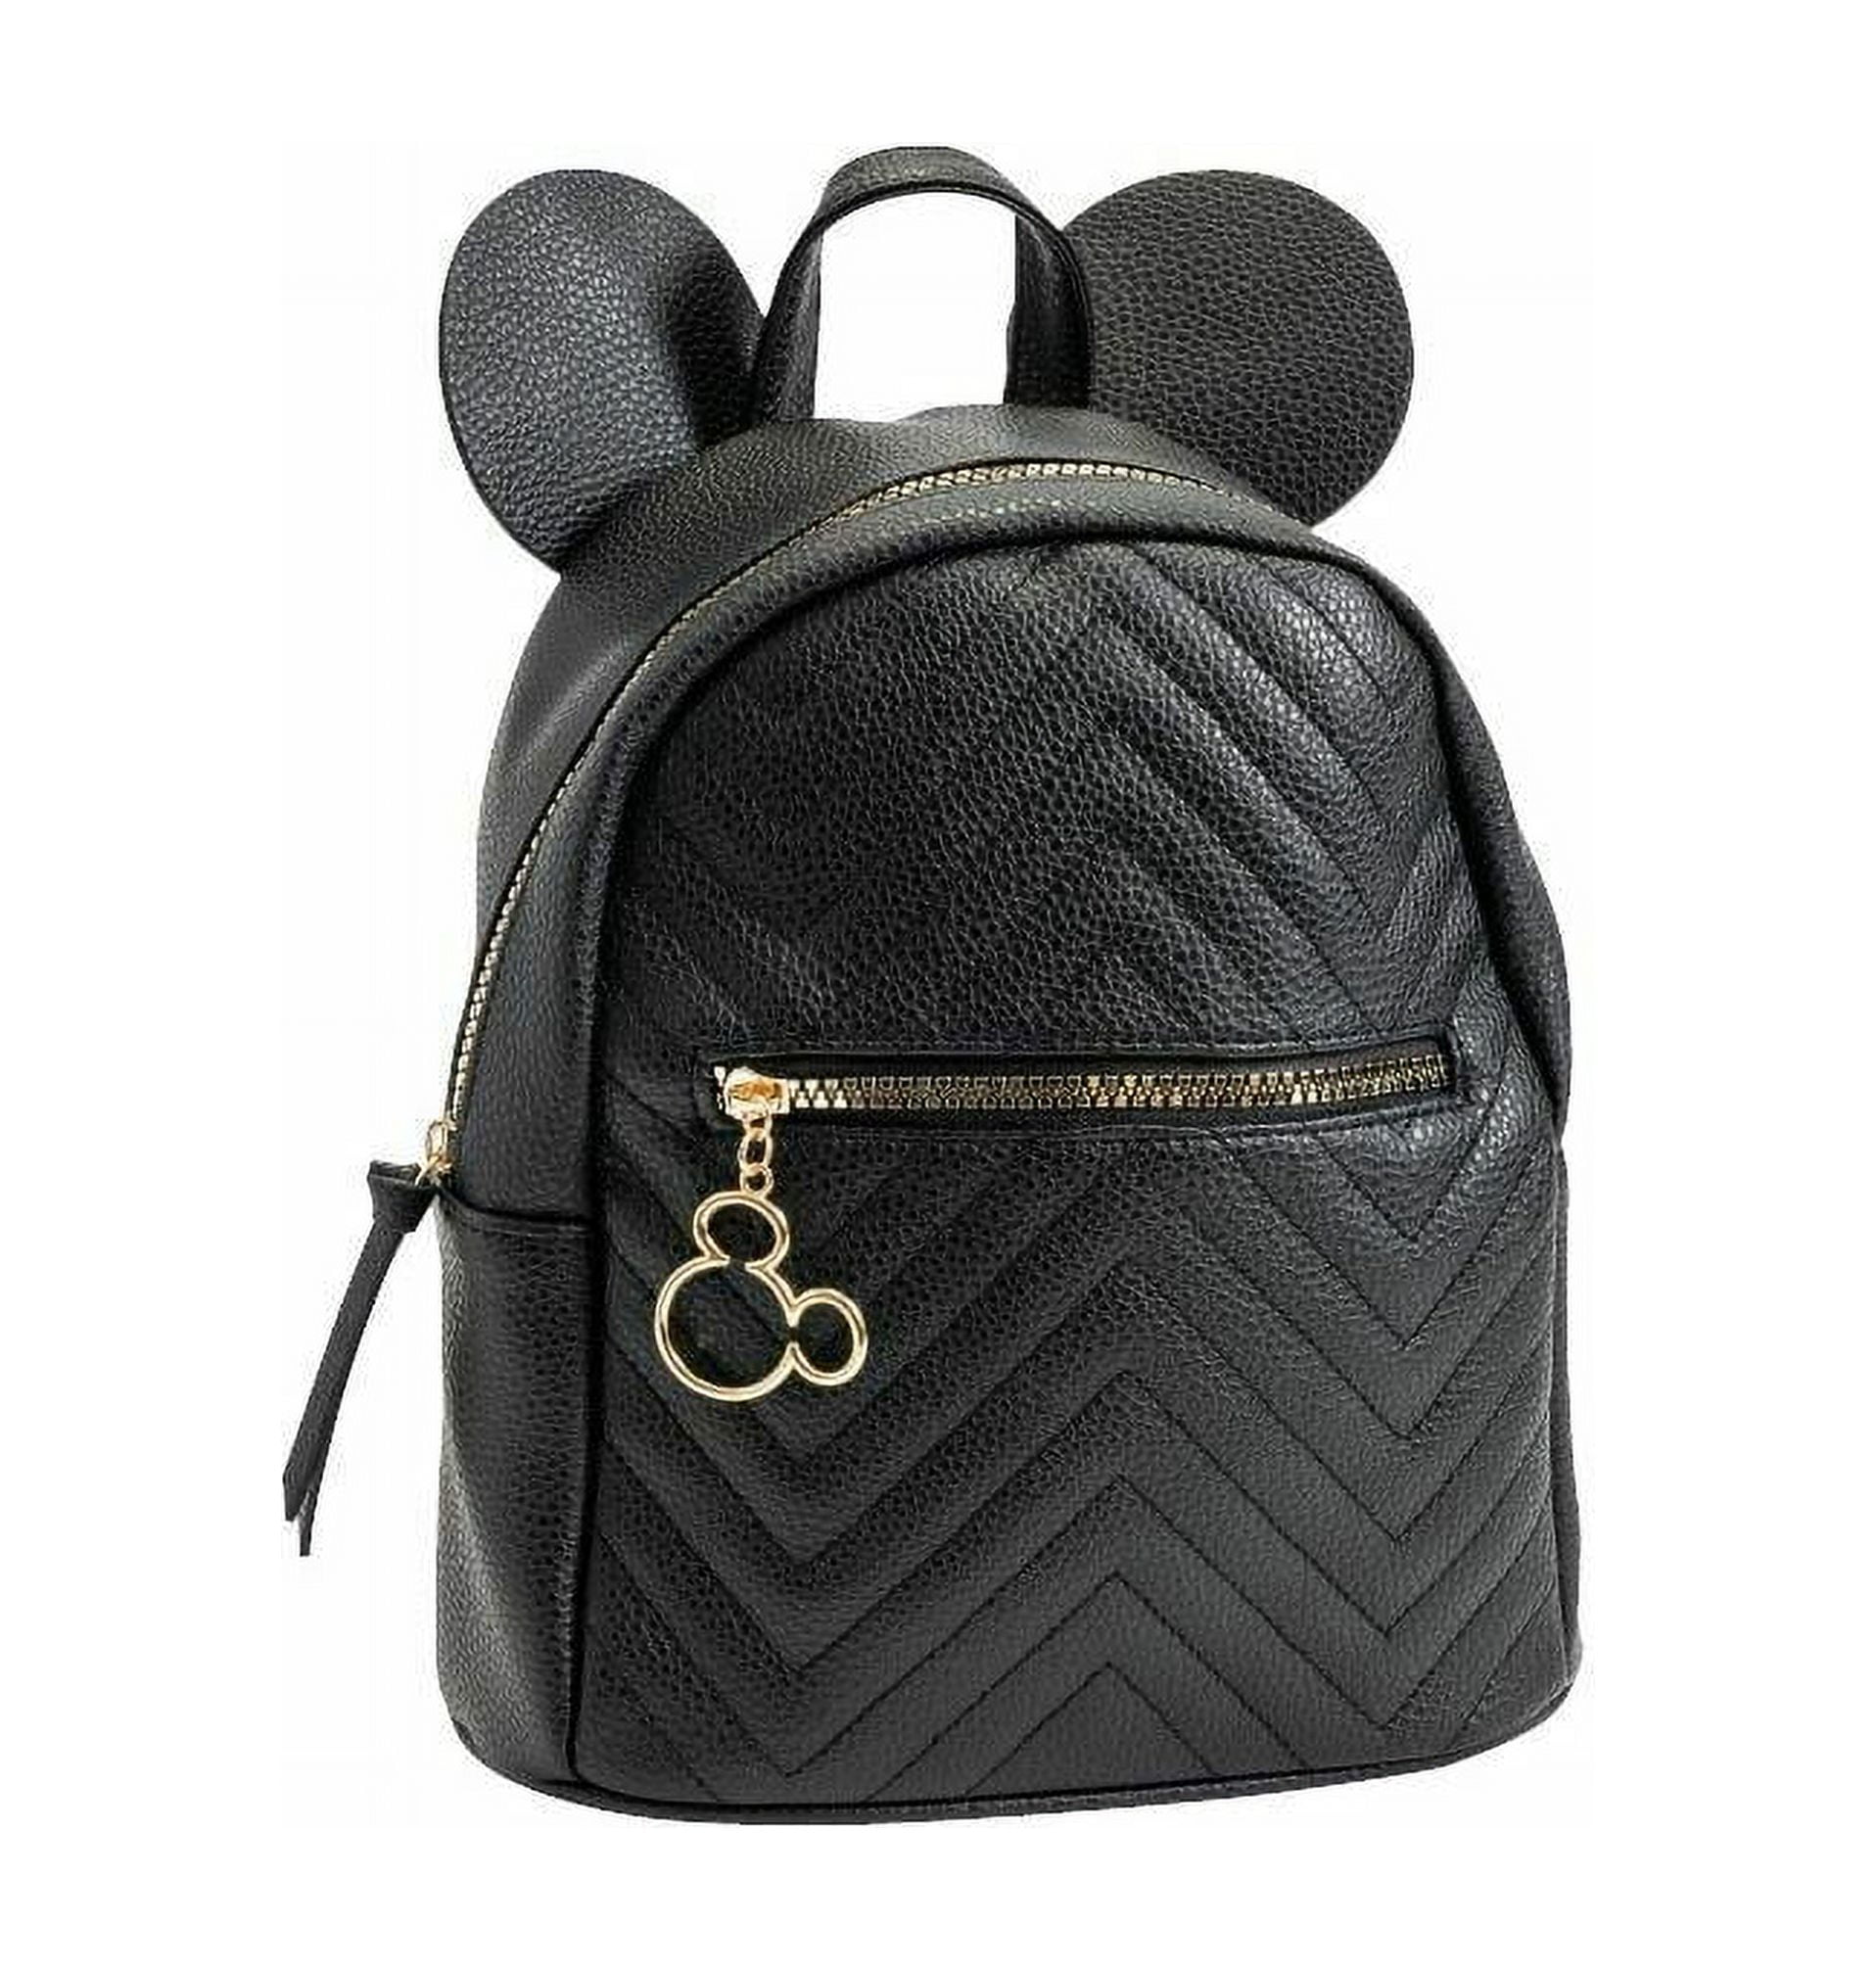 Disney Mickey and Minnie Mouse 11-inch Vegan Leather Mini Backpack